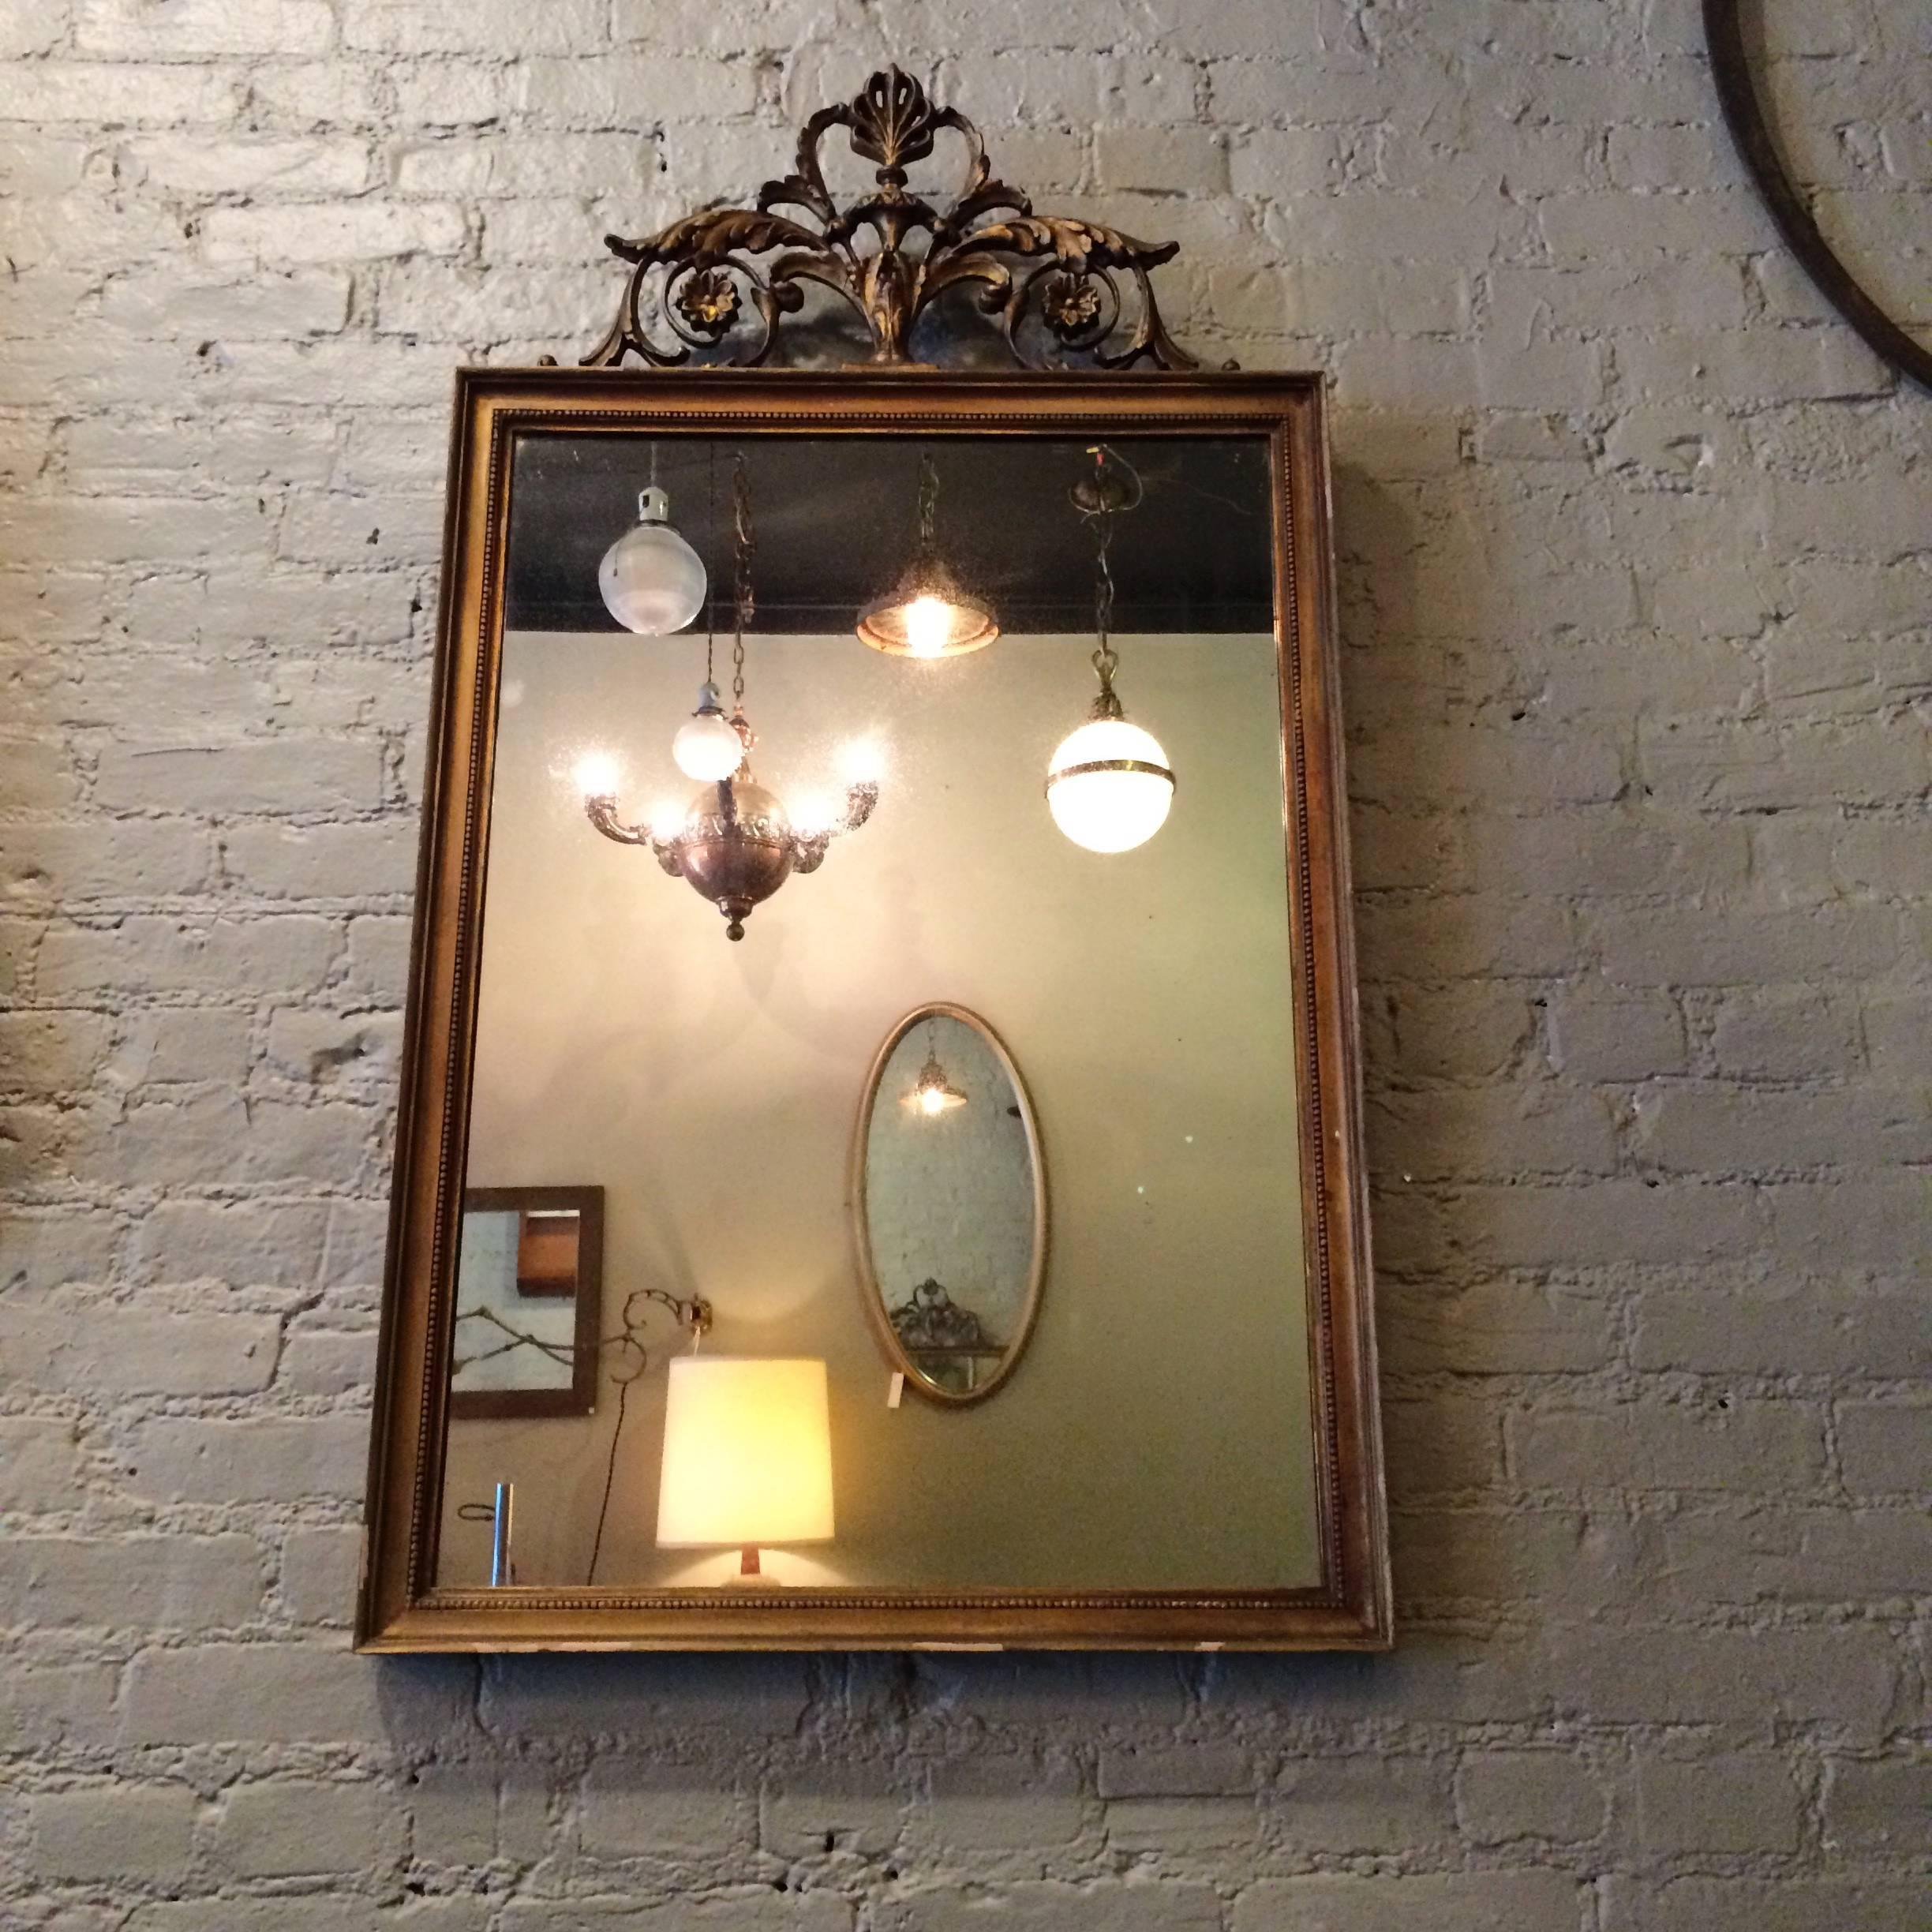 French Regency style, gilt wood, picture frame mirror with plumed top detail.